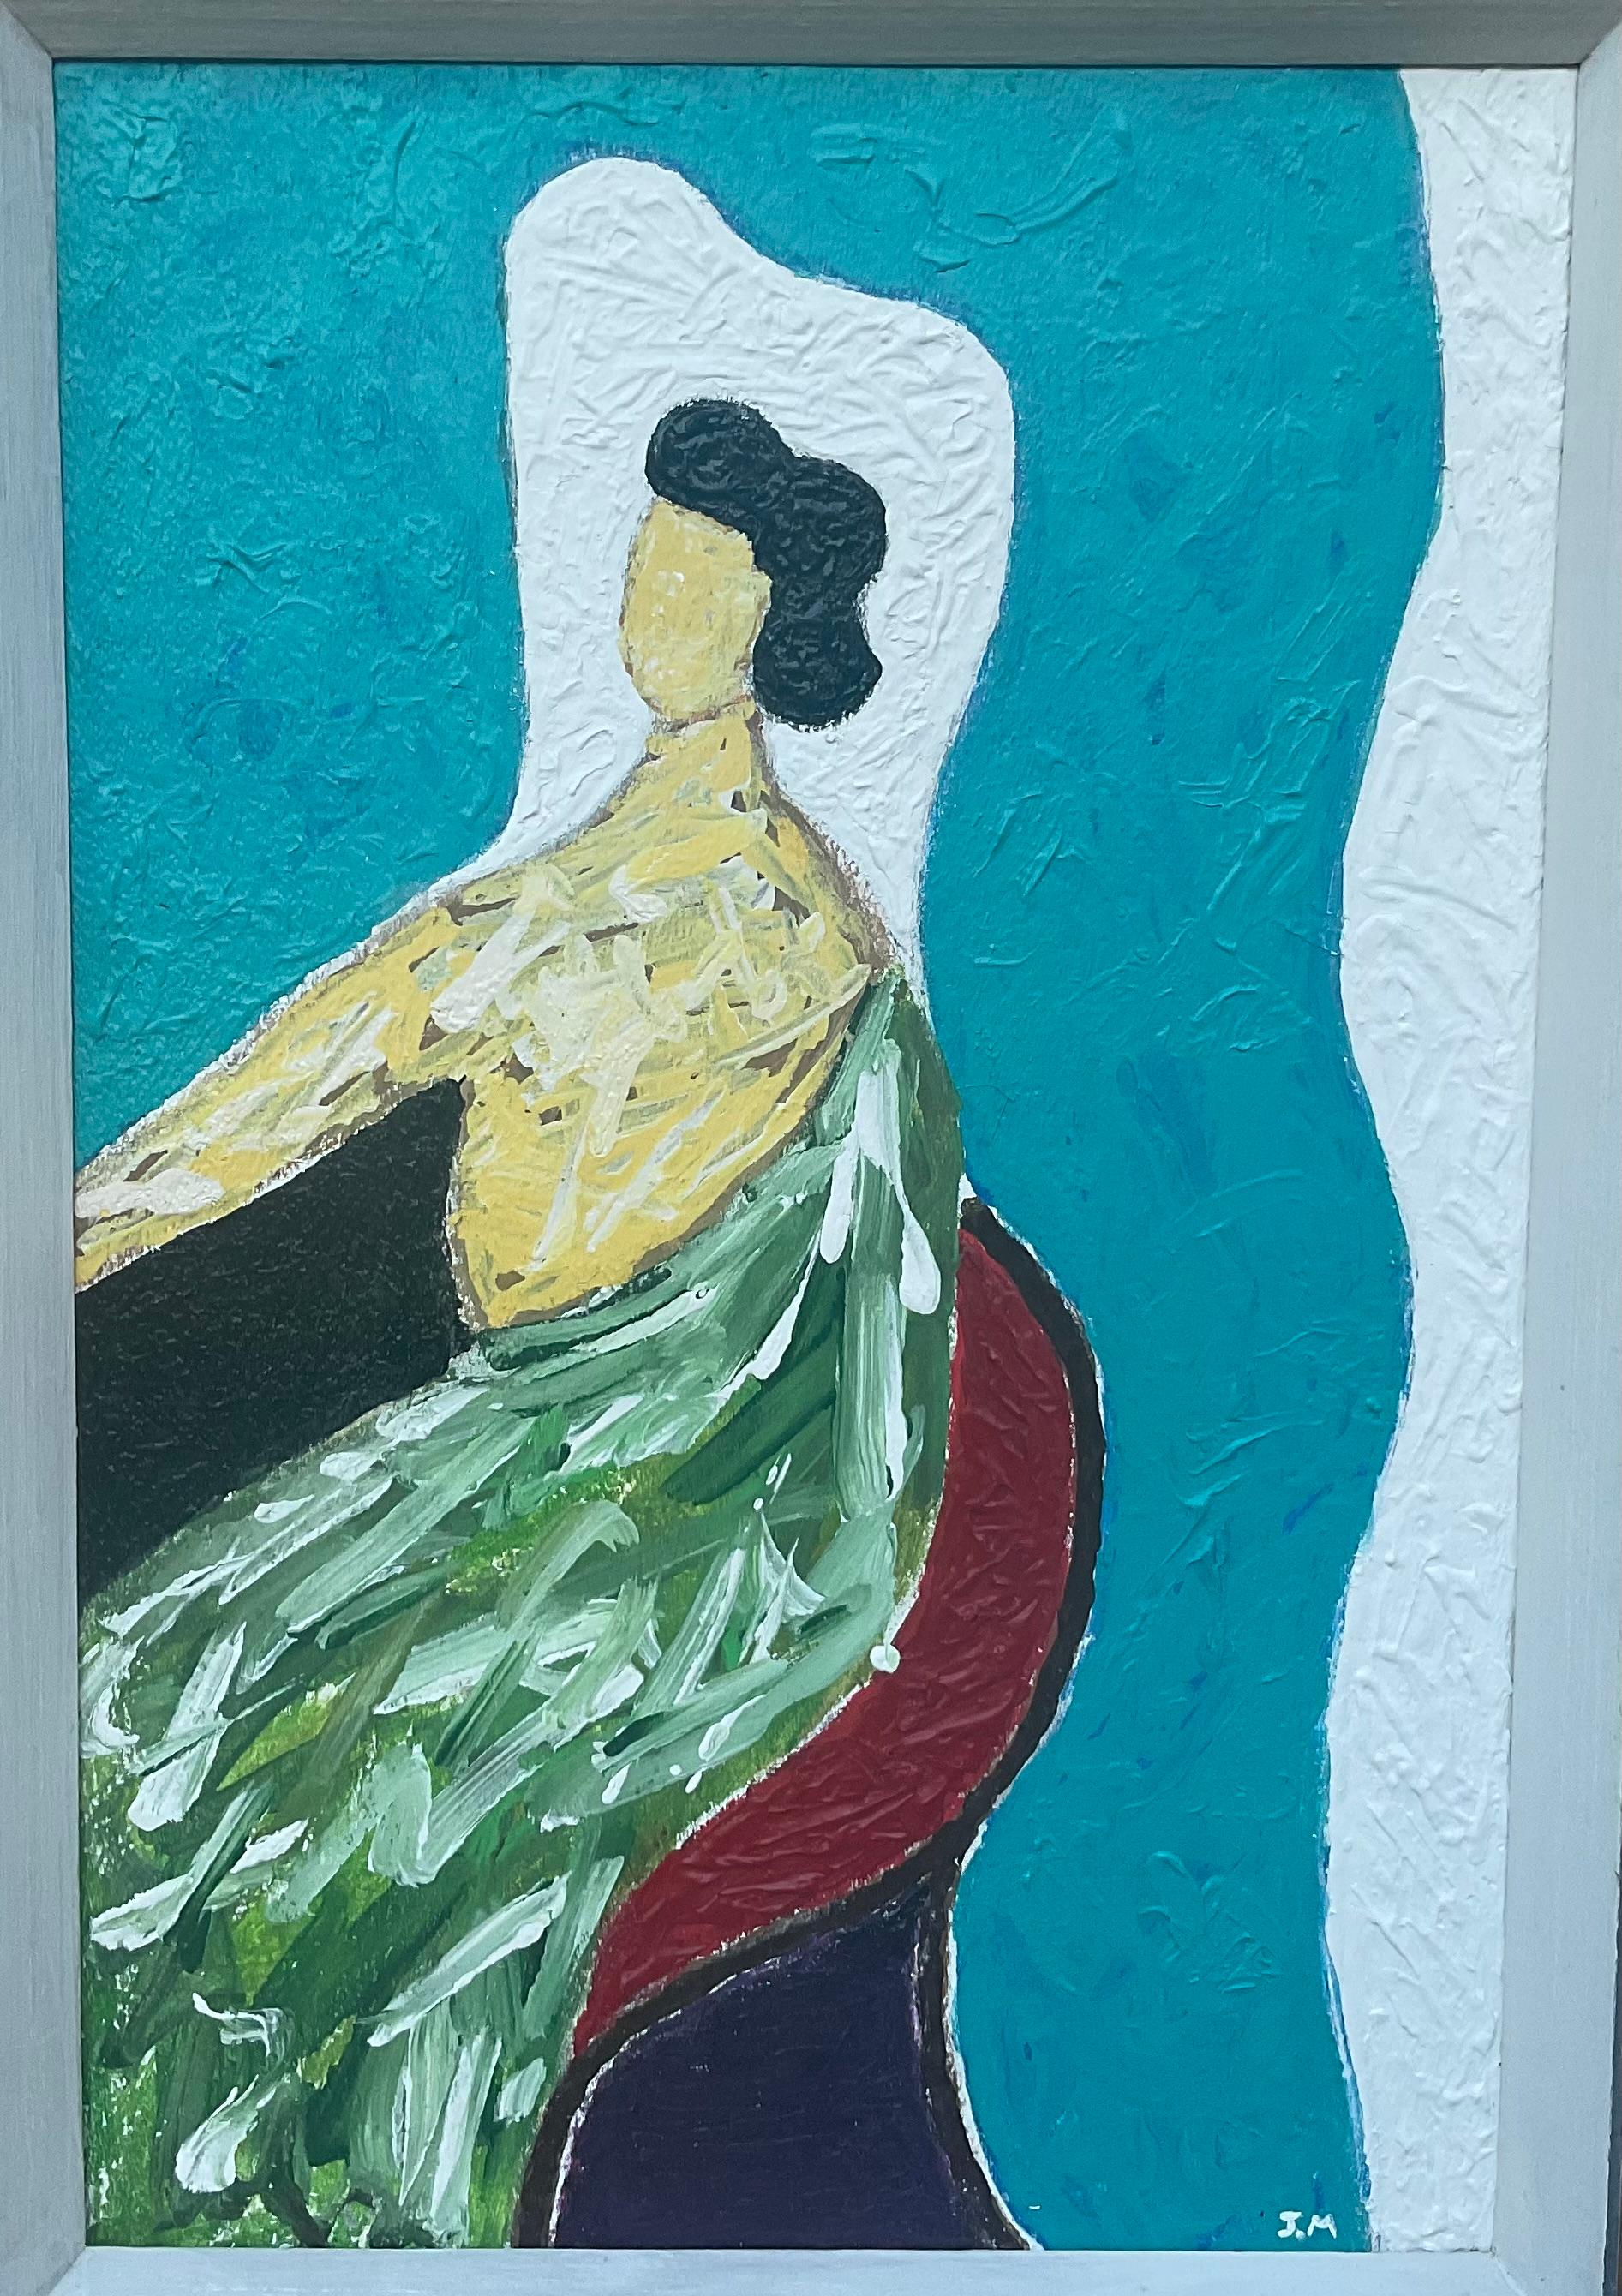 Funky acrylic painting hand painted on wood board ,of elegant woman sitting and looking forward, beautiful vivid colors on turquoise color background, Antique wood frame.
Actual painting size :12”.5 x 19”.5